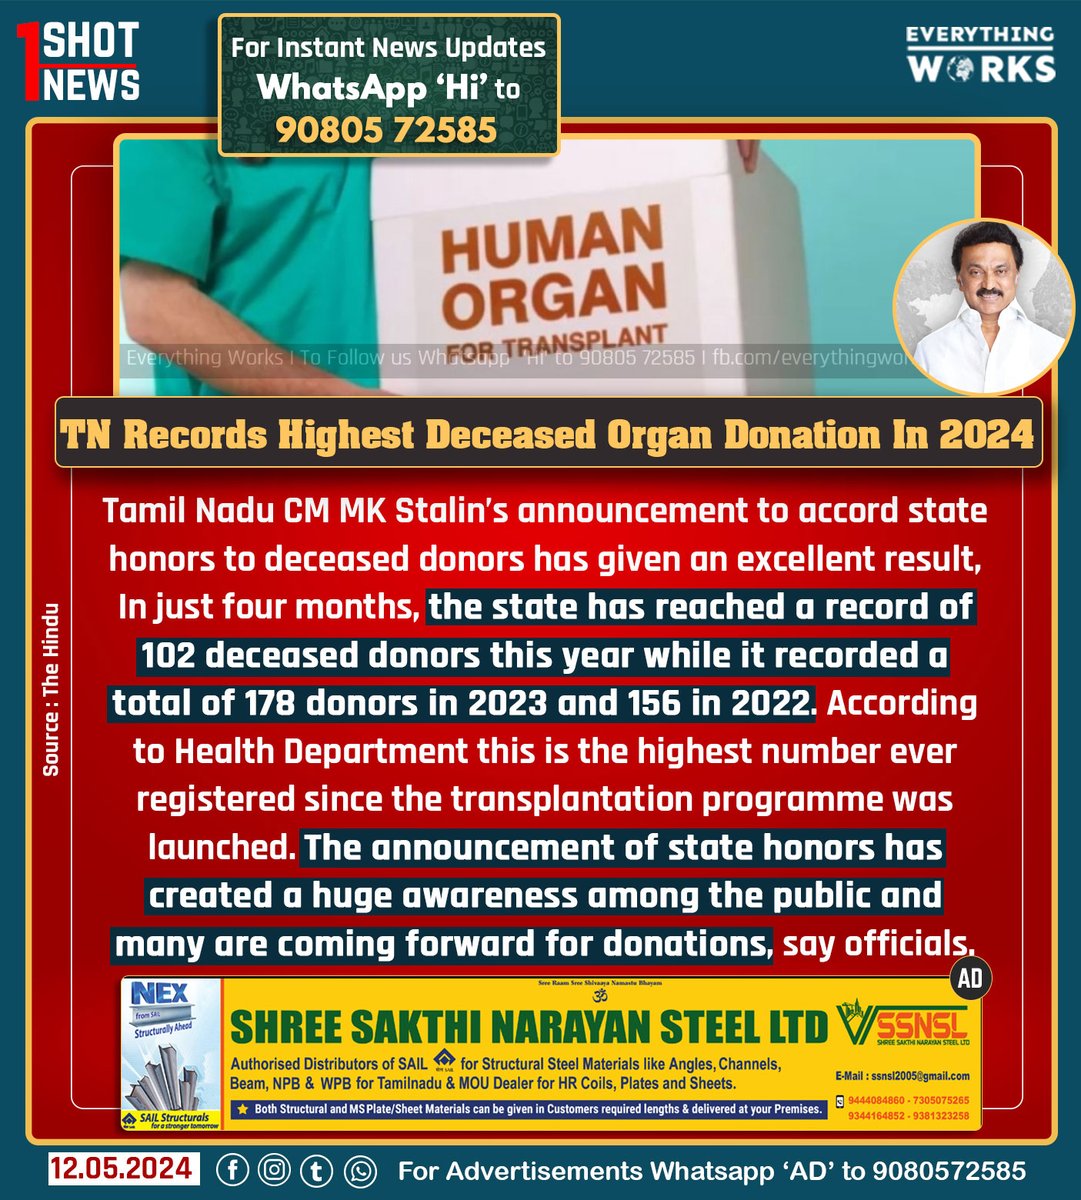 Tamil Nadu Chief Minister MK Stalin’s announcement to accord state honors to deceased donors has given an excellent result, In just four months, the state has reached a record of 102 deceased donors this year while it recorded a total of 178 donors in 2023 and 156 in 2022.…